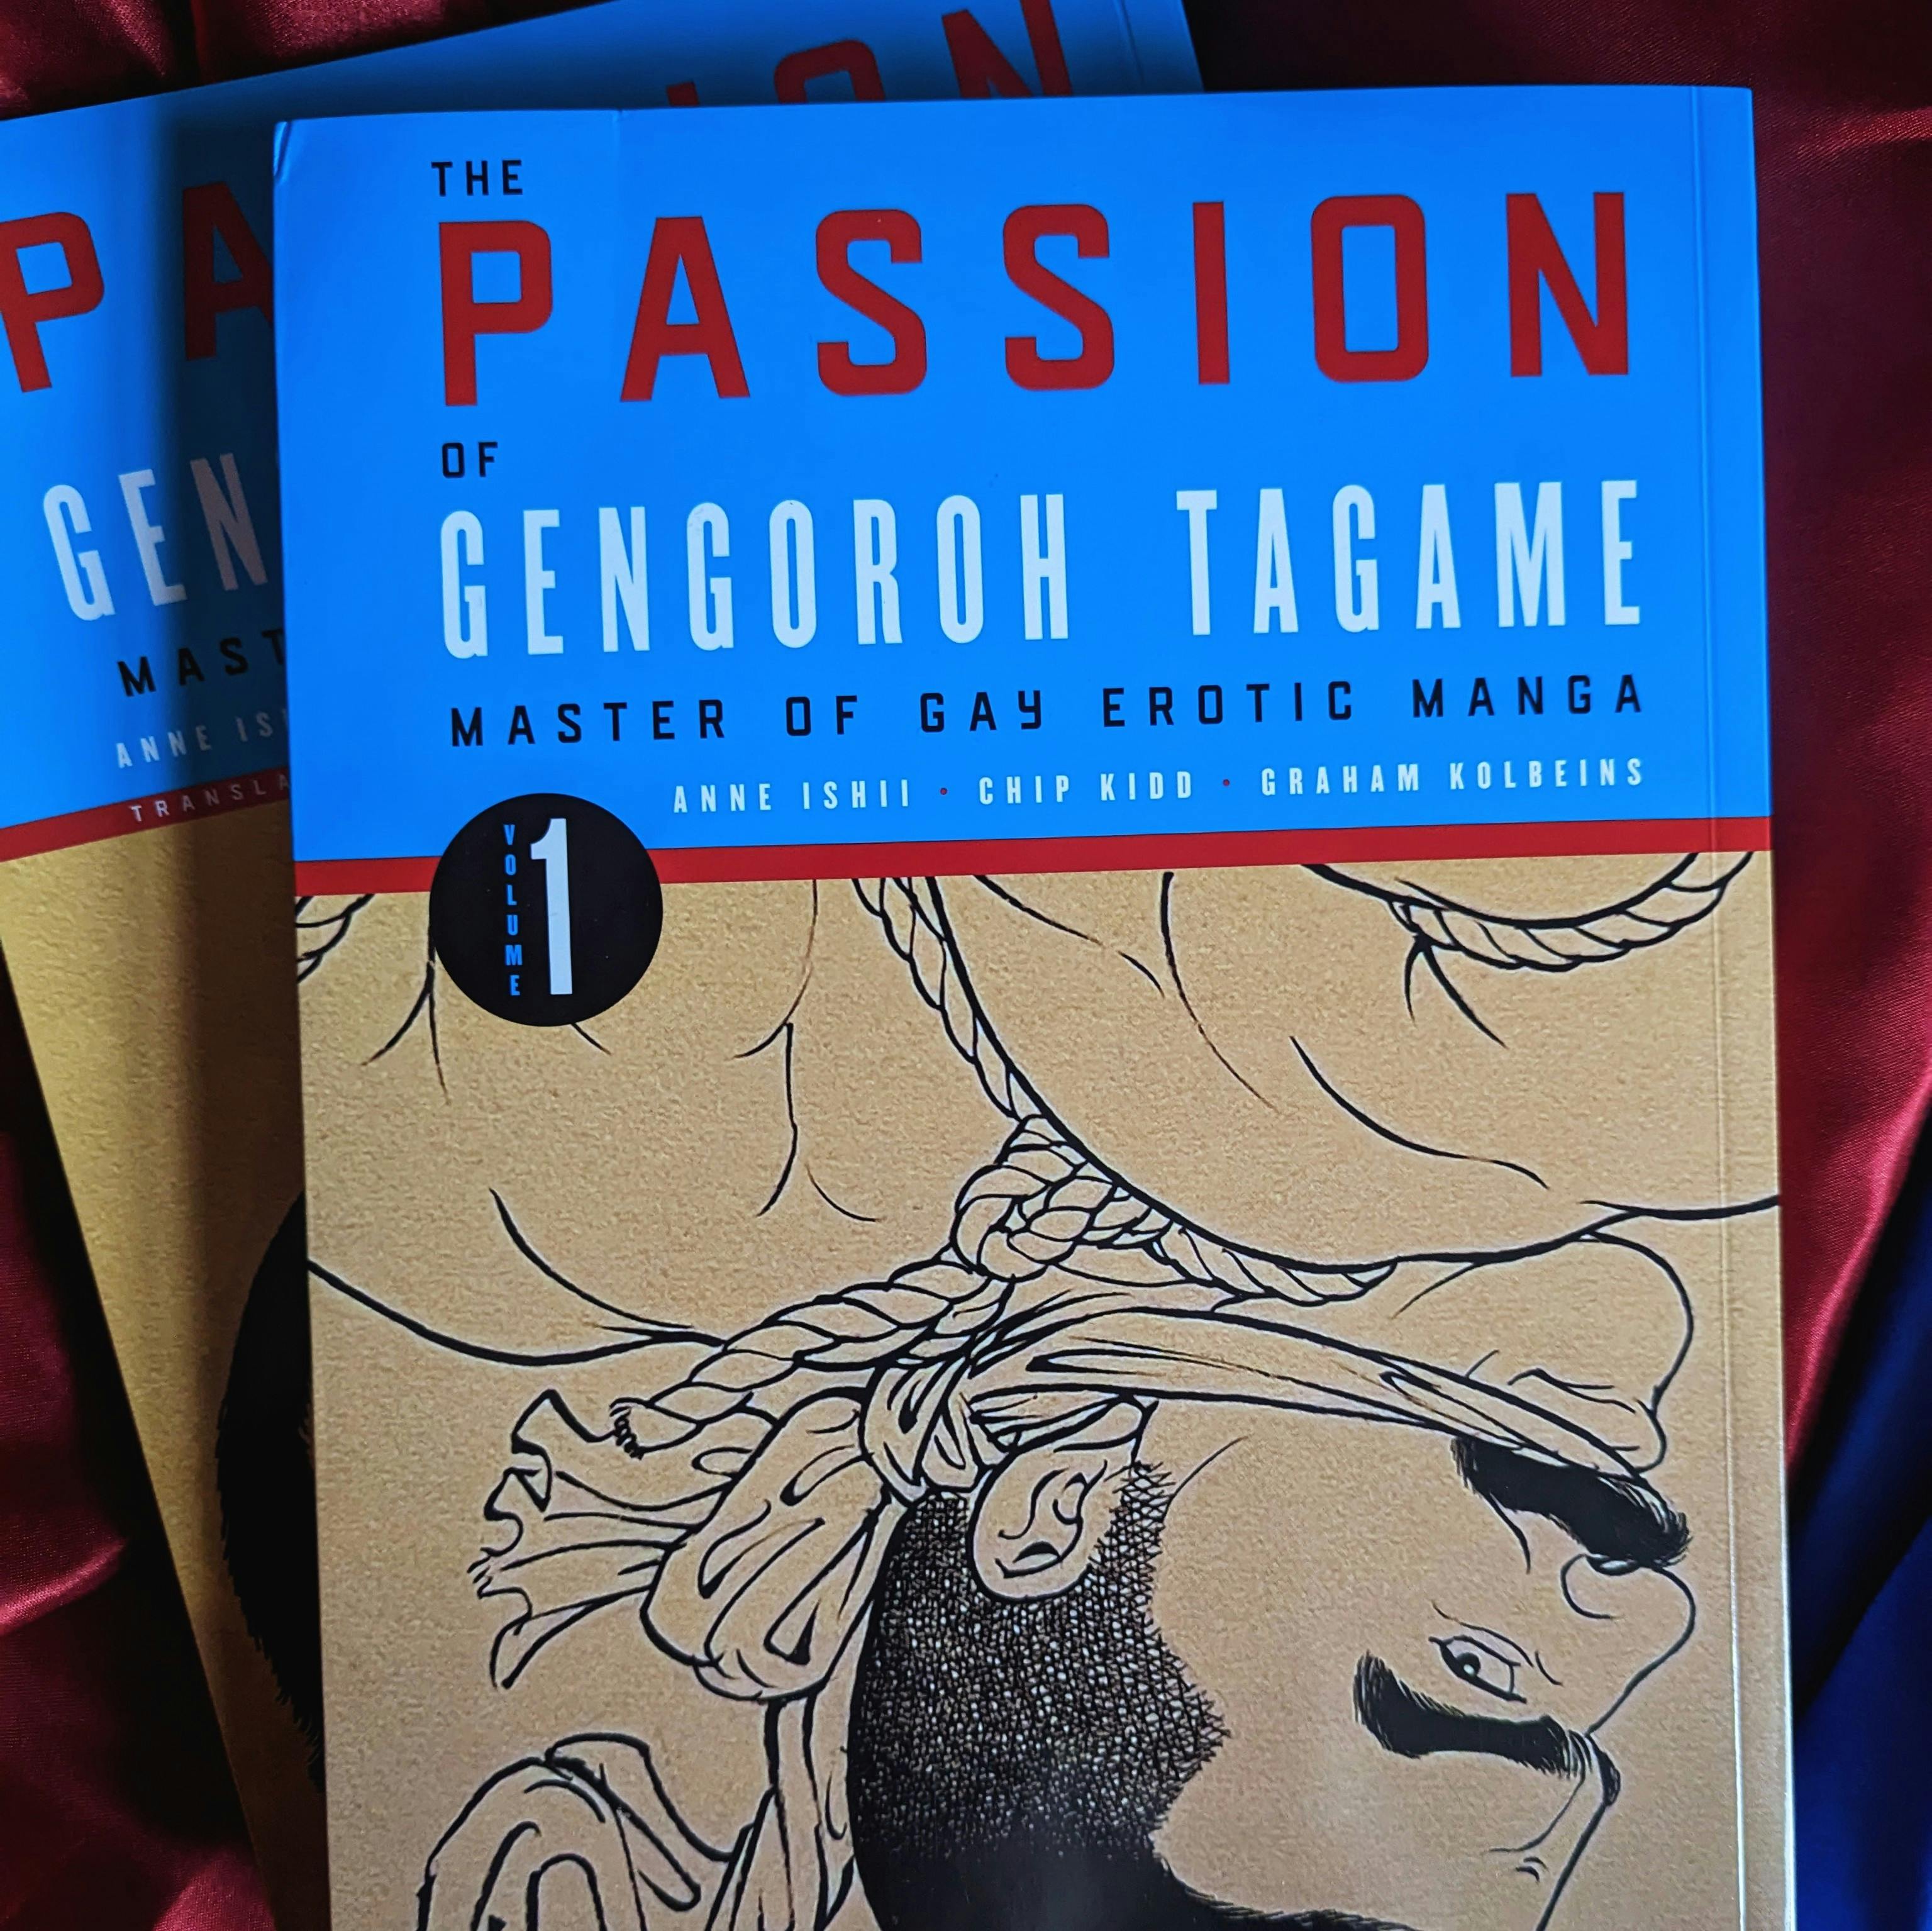 cover of volume 1 of The Passion on Gengohor Tagamae; features line art of bound and gagged hunky male